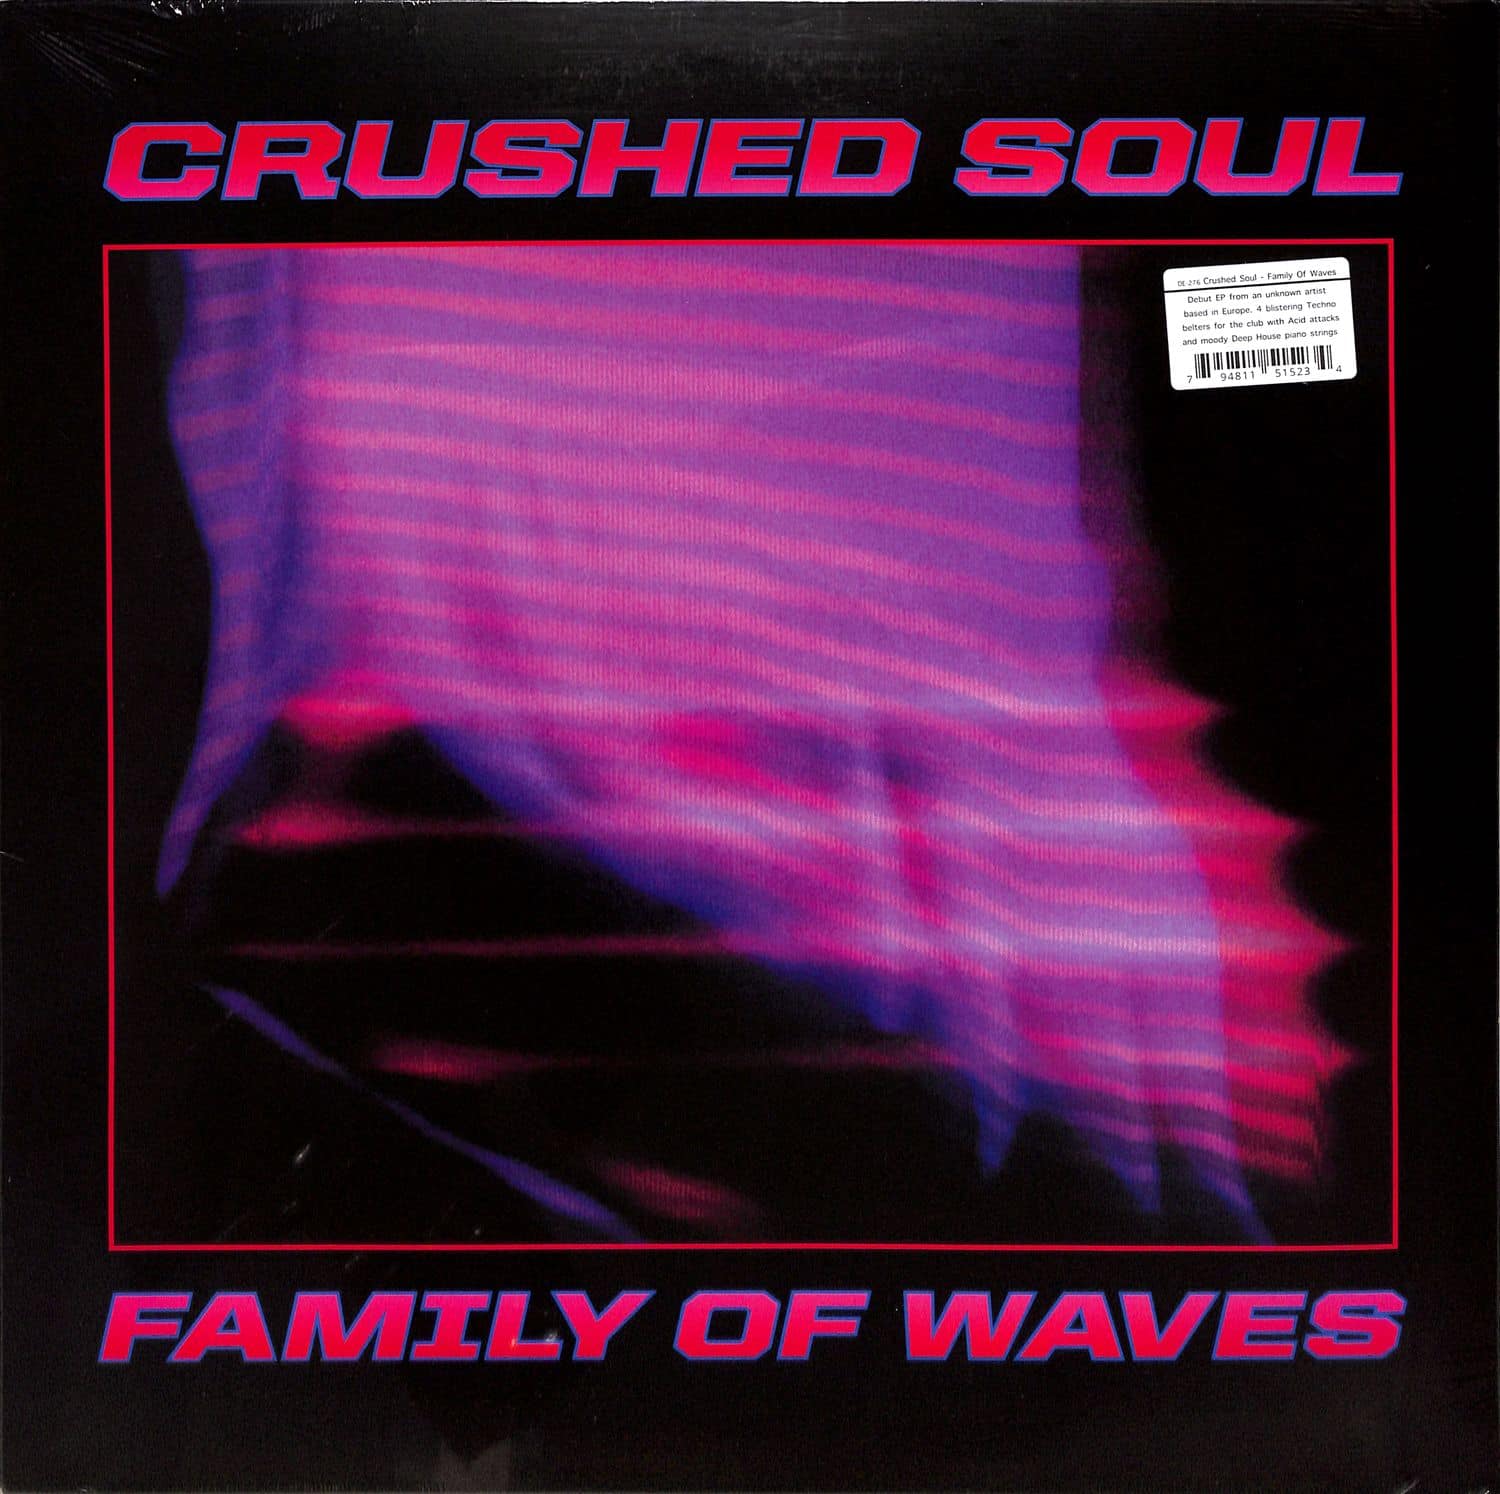 Crushed Soul aka Steffi - FAMILY OF WAVES EP